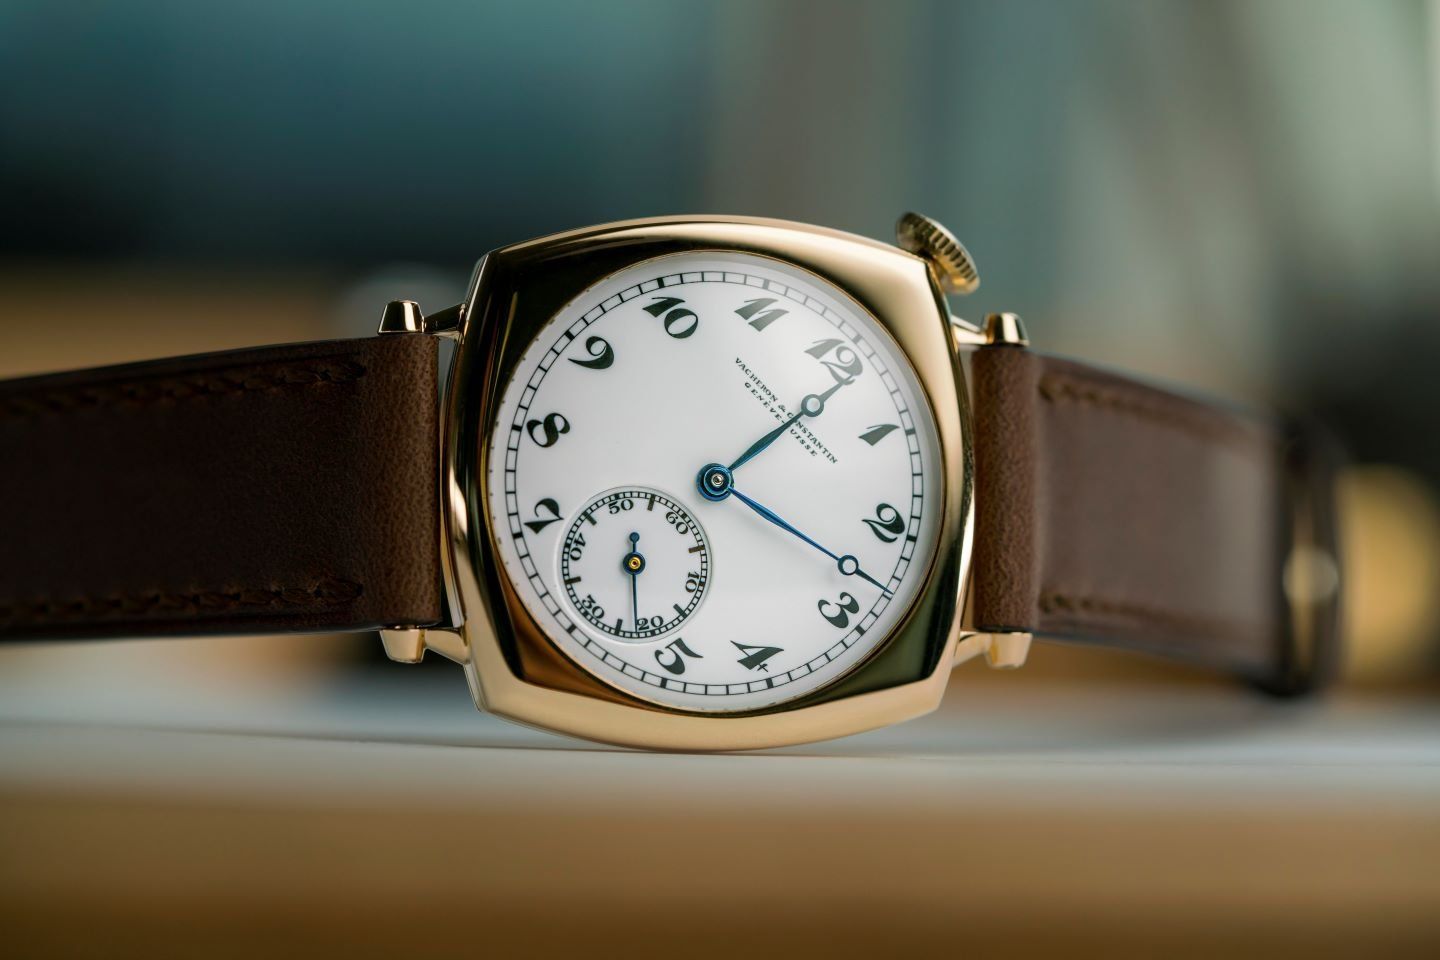 The American 1921 to mark the 100th anniversary of the original watch